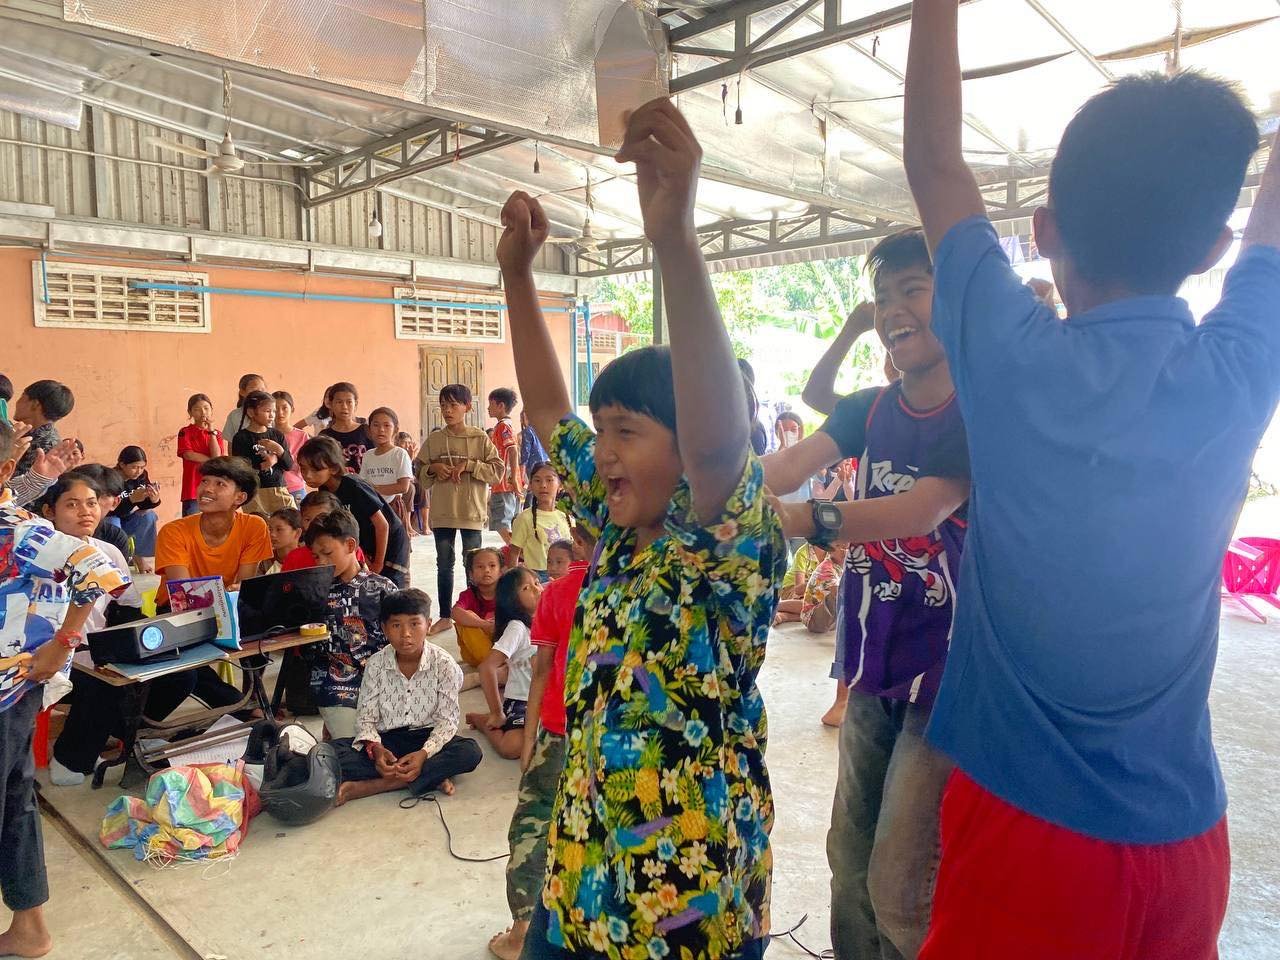 Last month our staff and students in Cambodia celebrated Children&rsquo;s Day by leading a camp for our elementary-aged students. Youth leaders and senior teachers stepped up in awesome ways to provide an exciting, meaningful experience that helped o